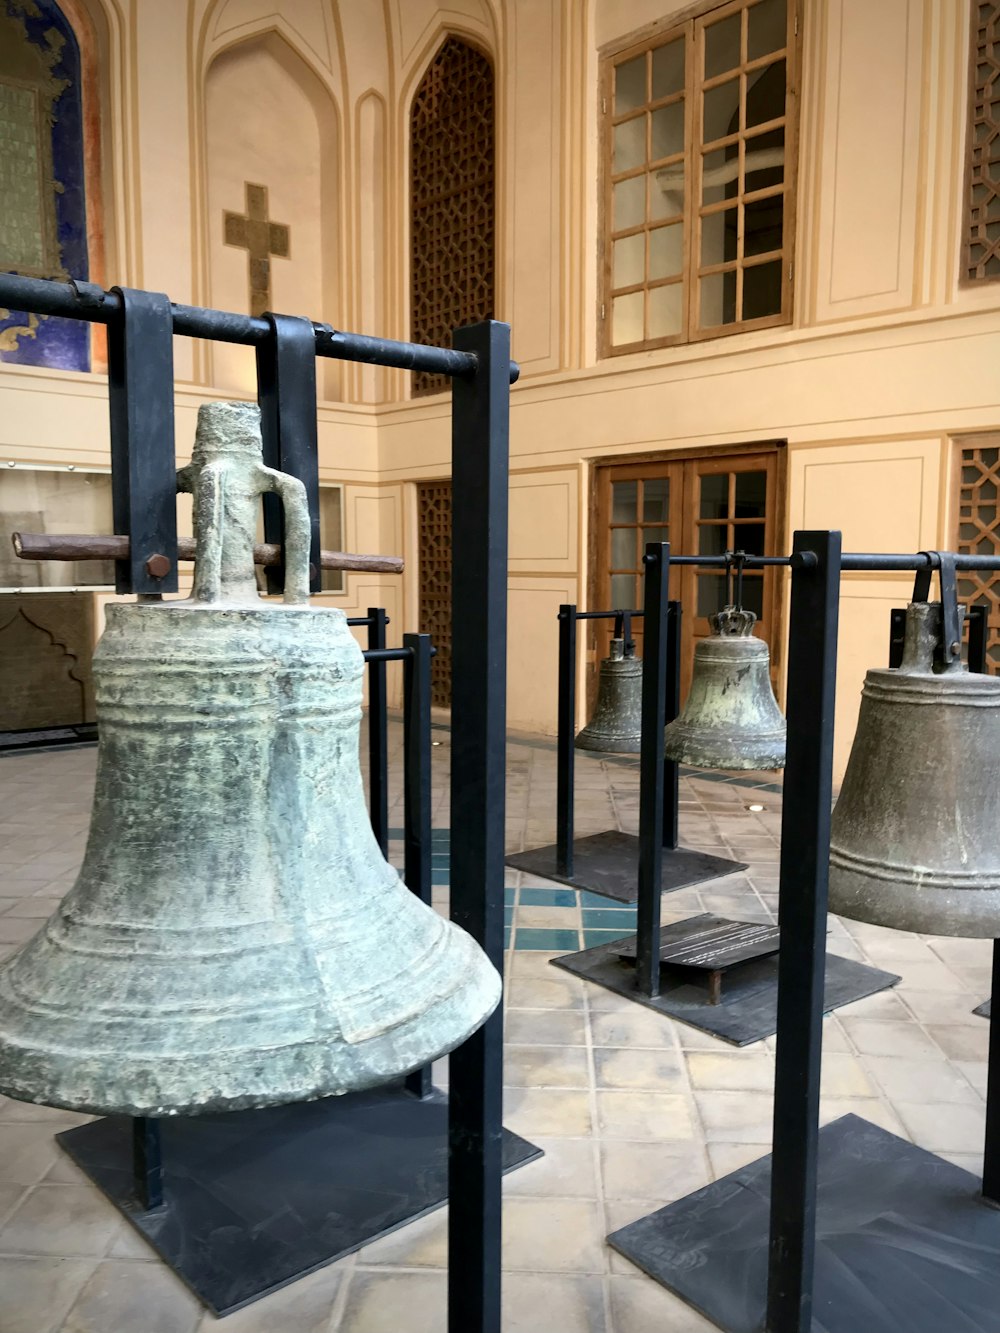 a group of bells sitting on top of a tiled floor